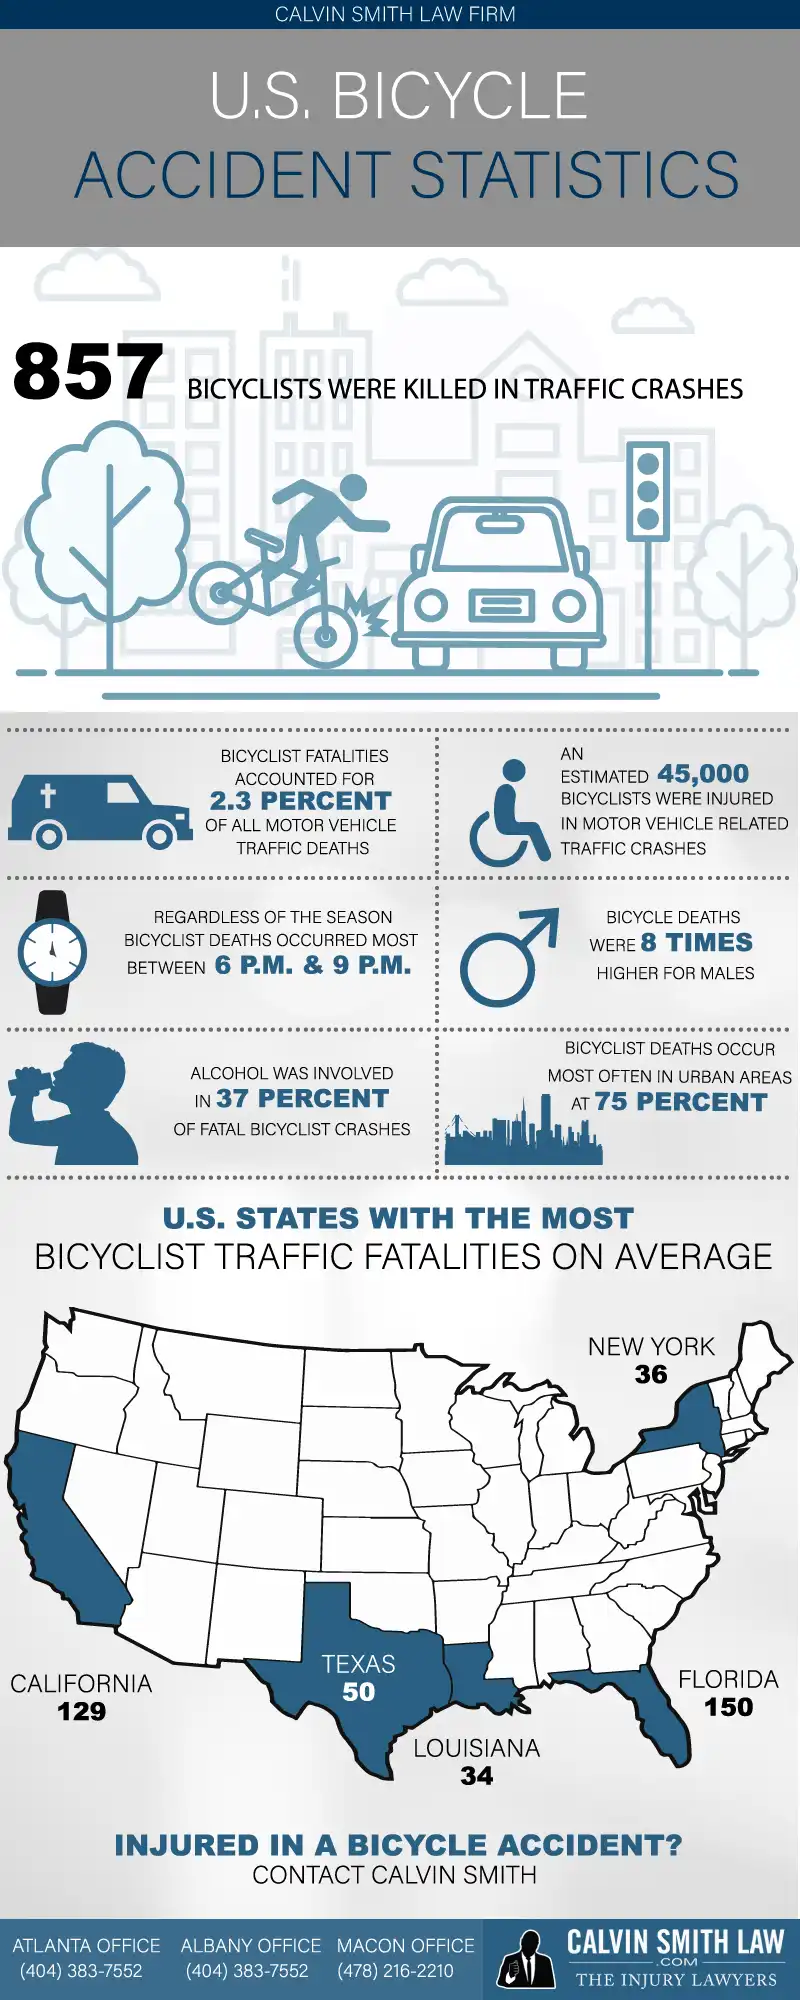 US Bicycle Accident Statistics Calvin Smith Law Firm